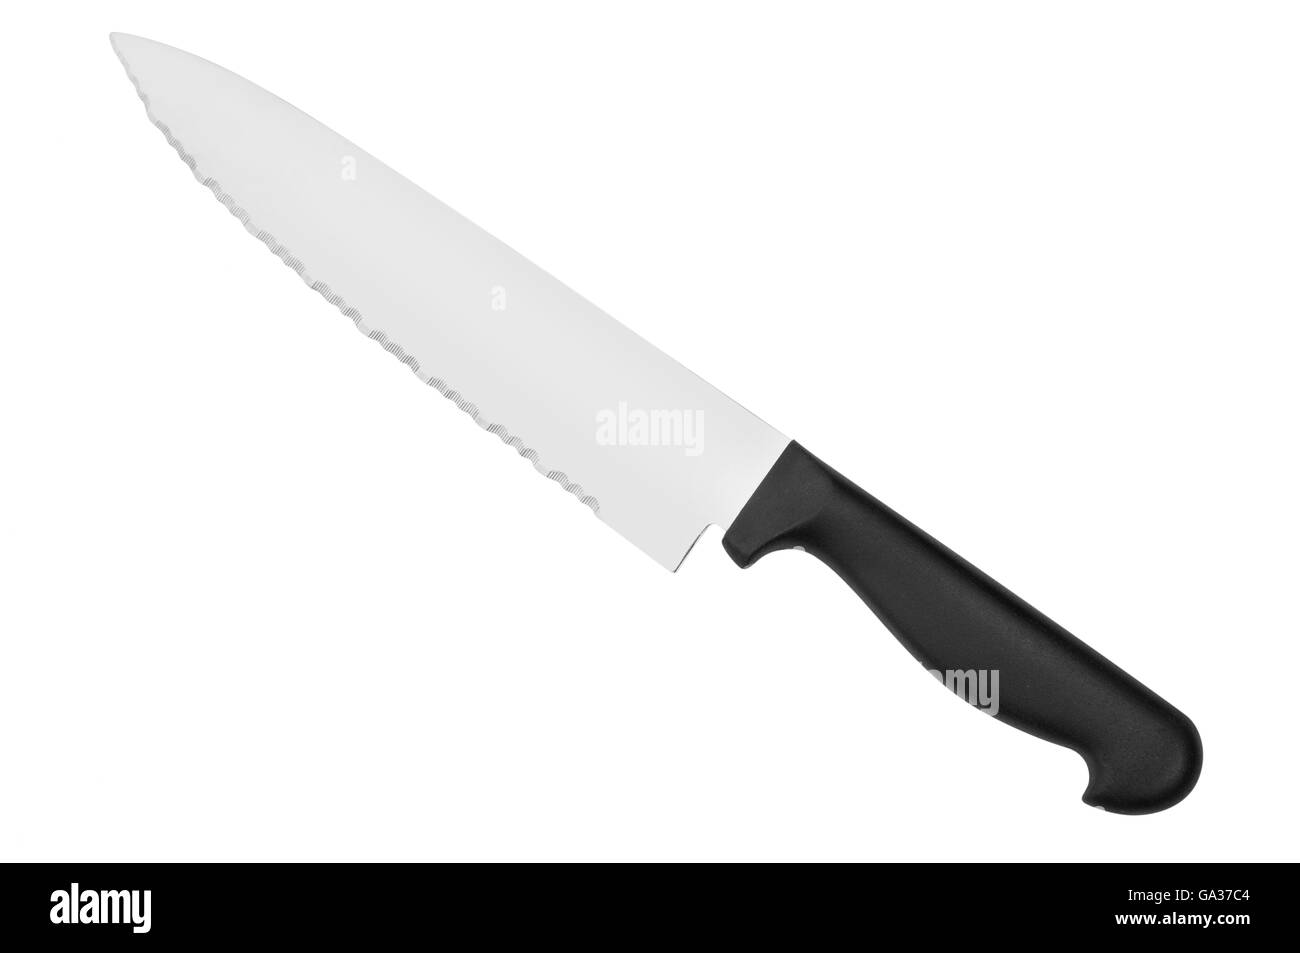 Stainless Steel Knife Isolated on White Background Stock Photo